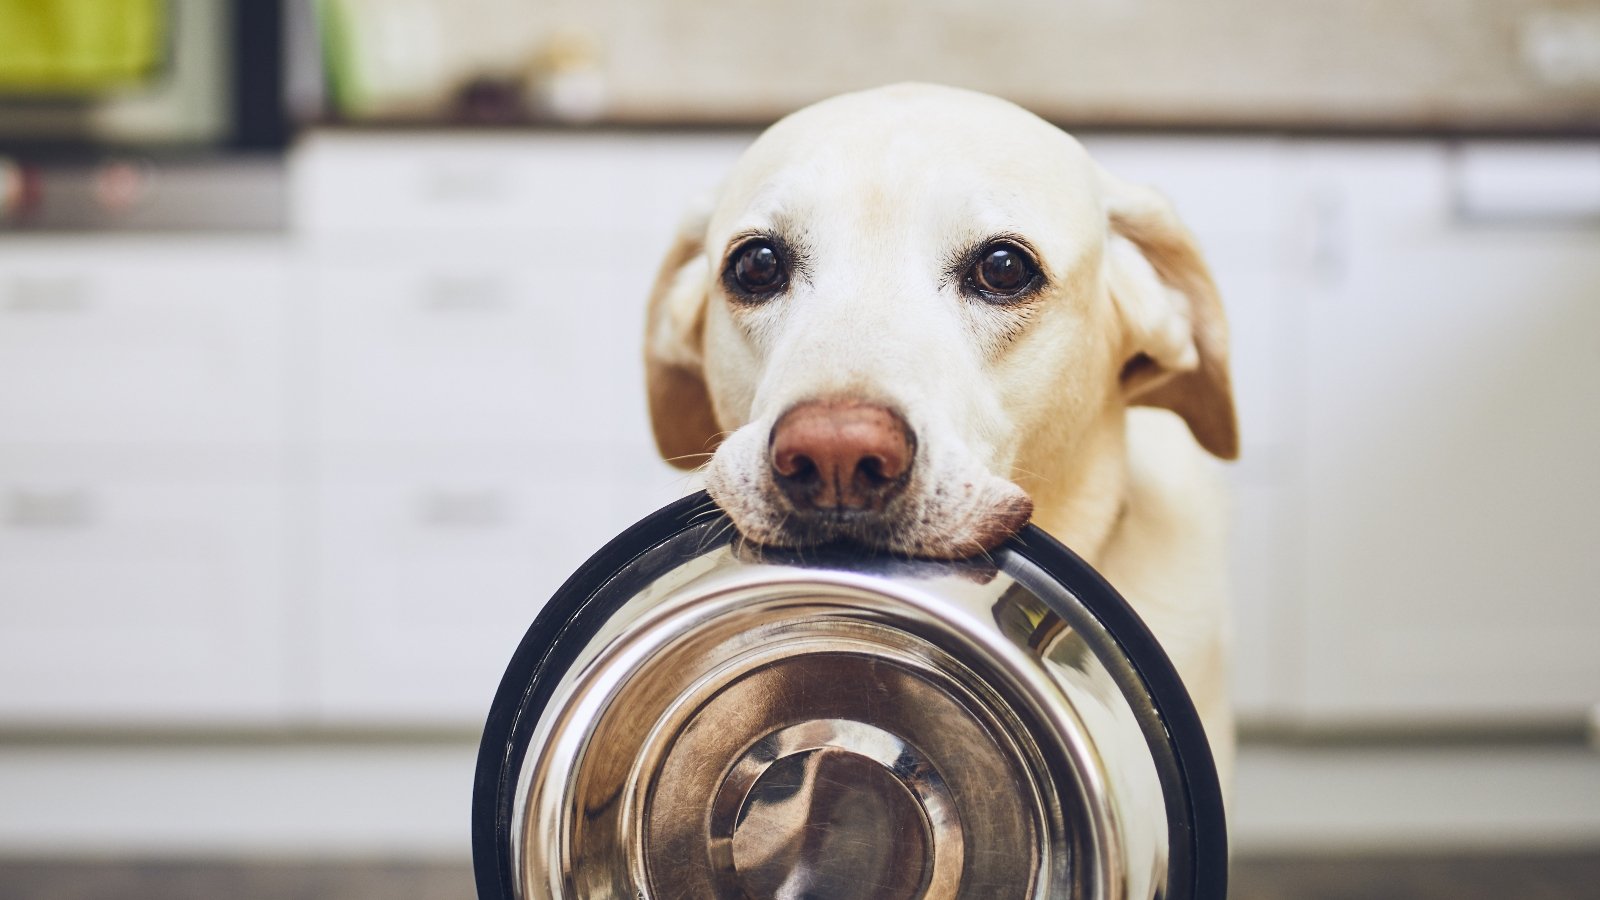 labrador holding a pet food bowl in their mouth